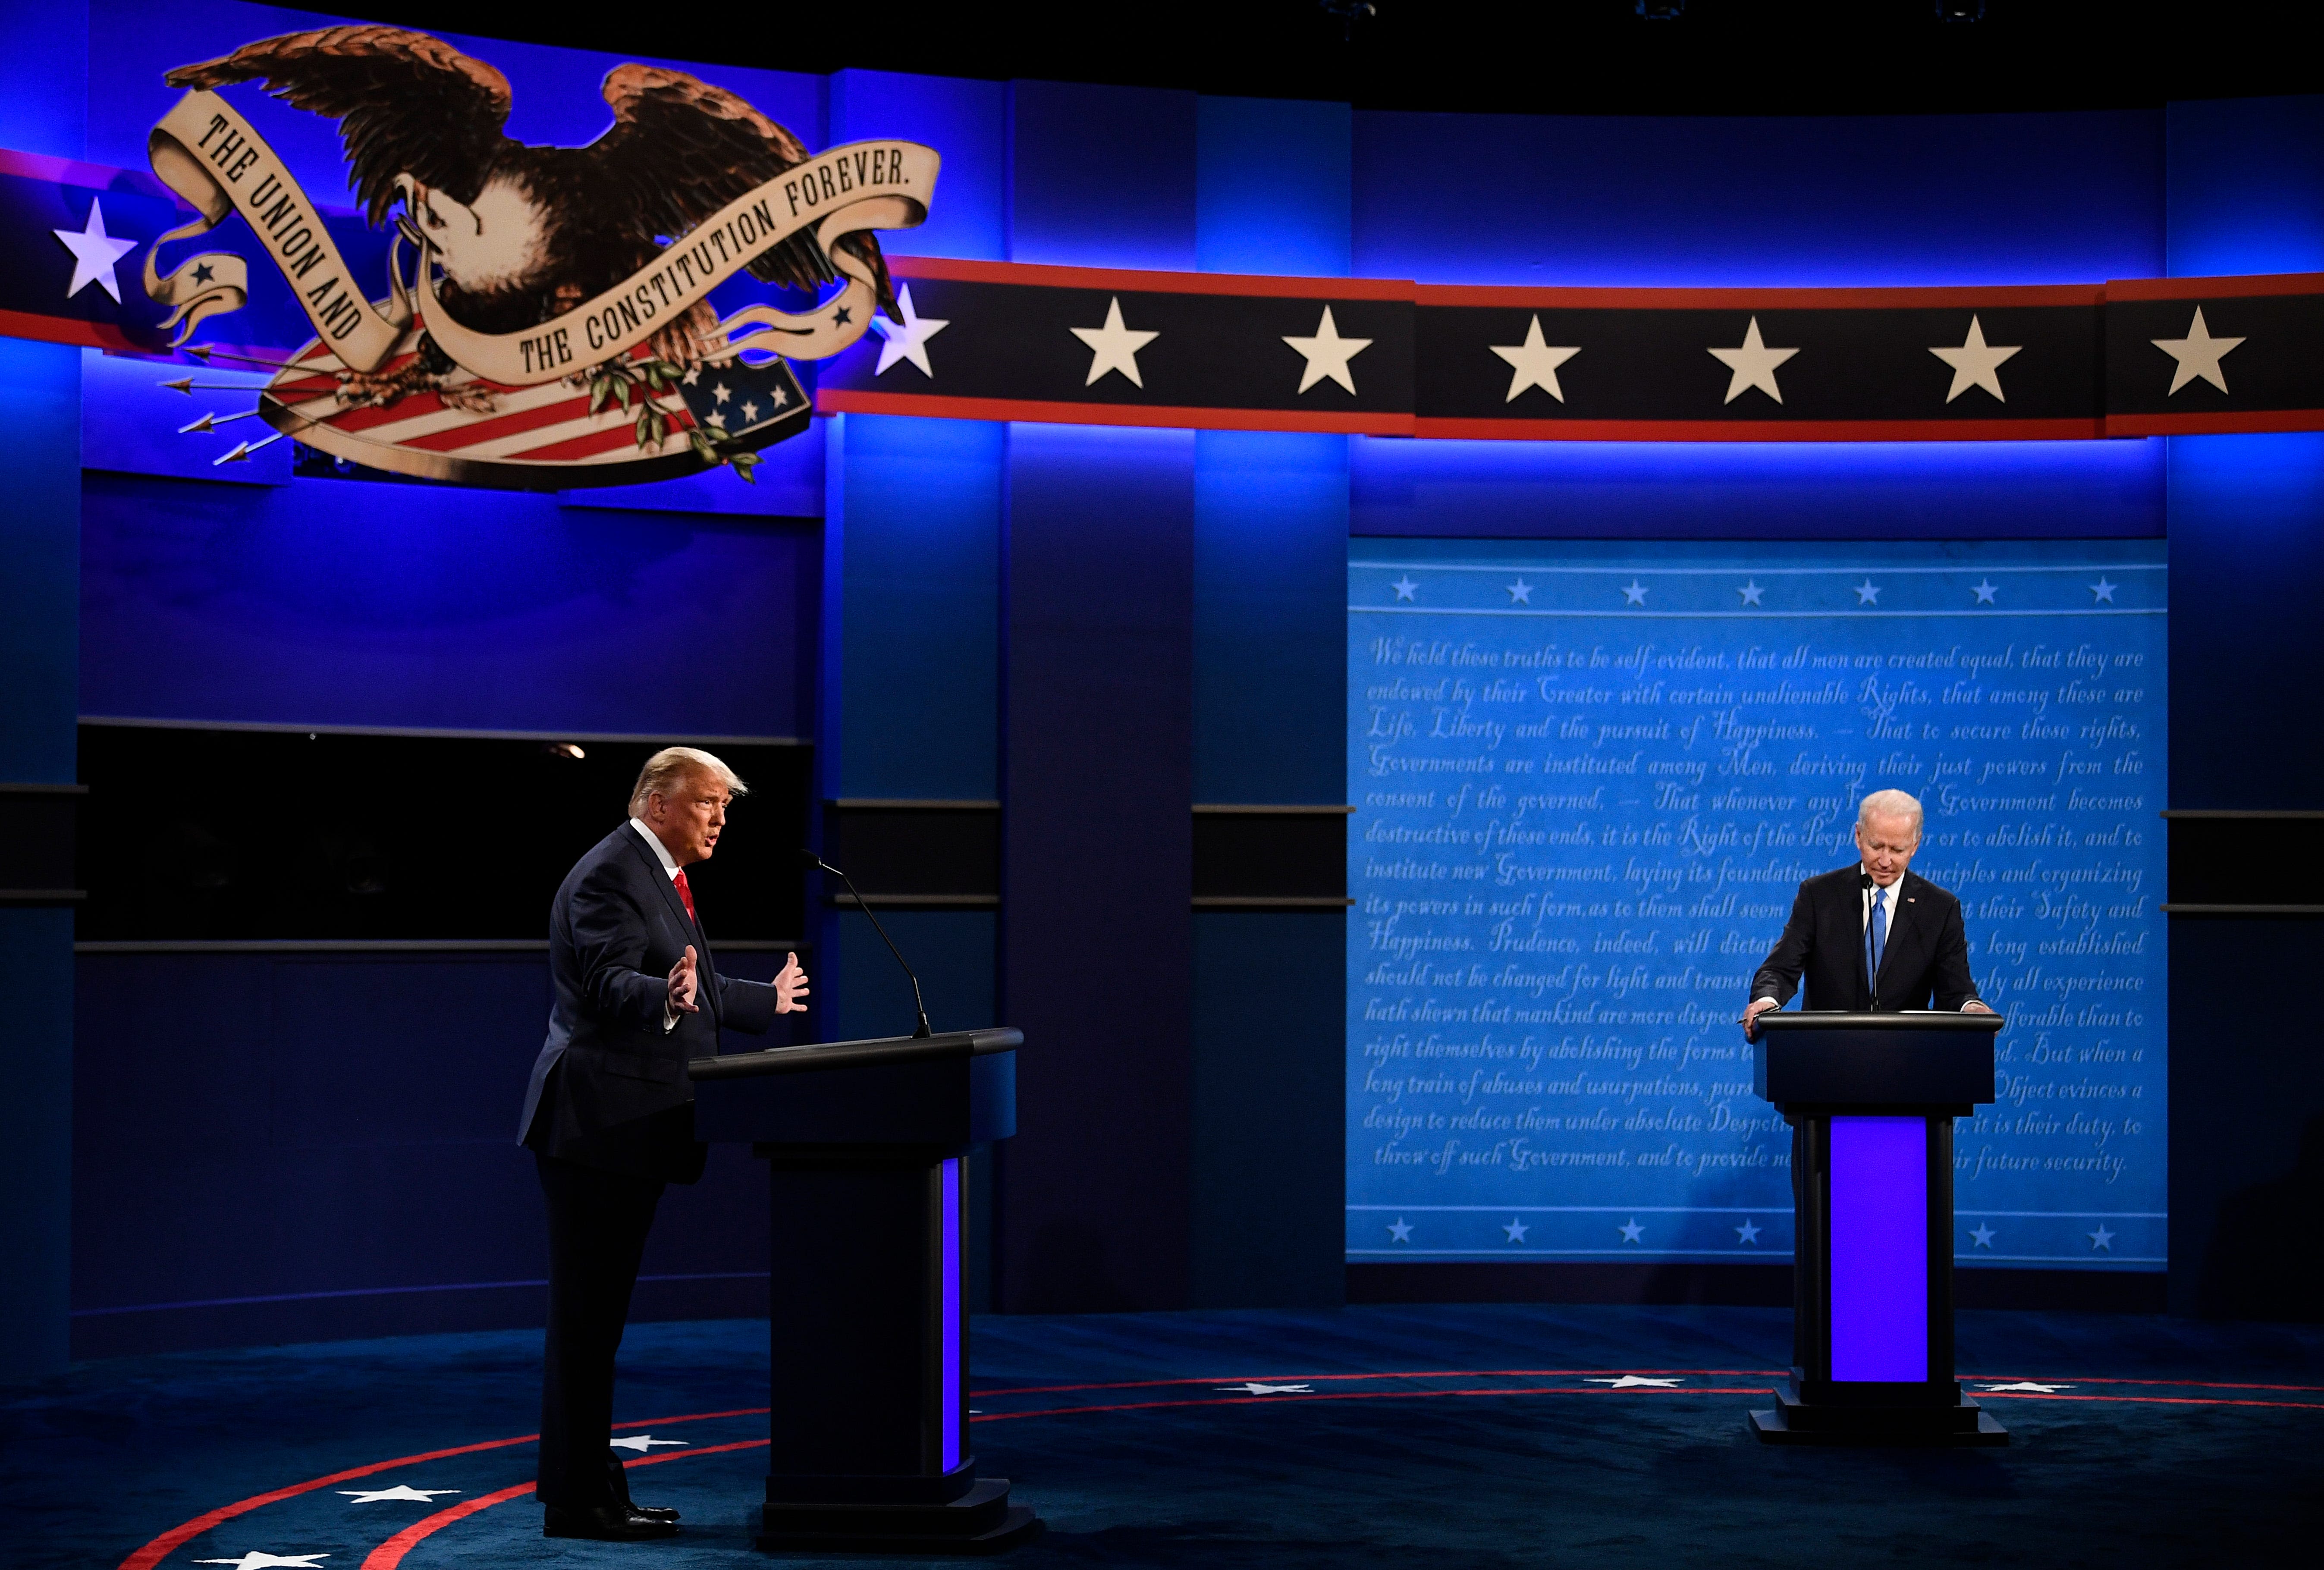 If I were in charge of the Biden-Trump debate, I'd make it a reality show competition